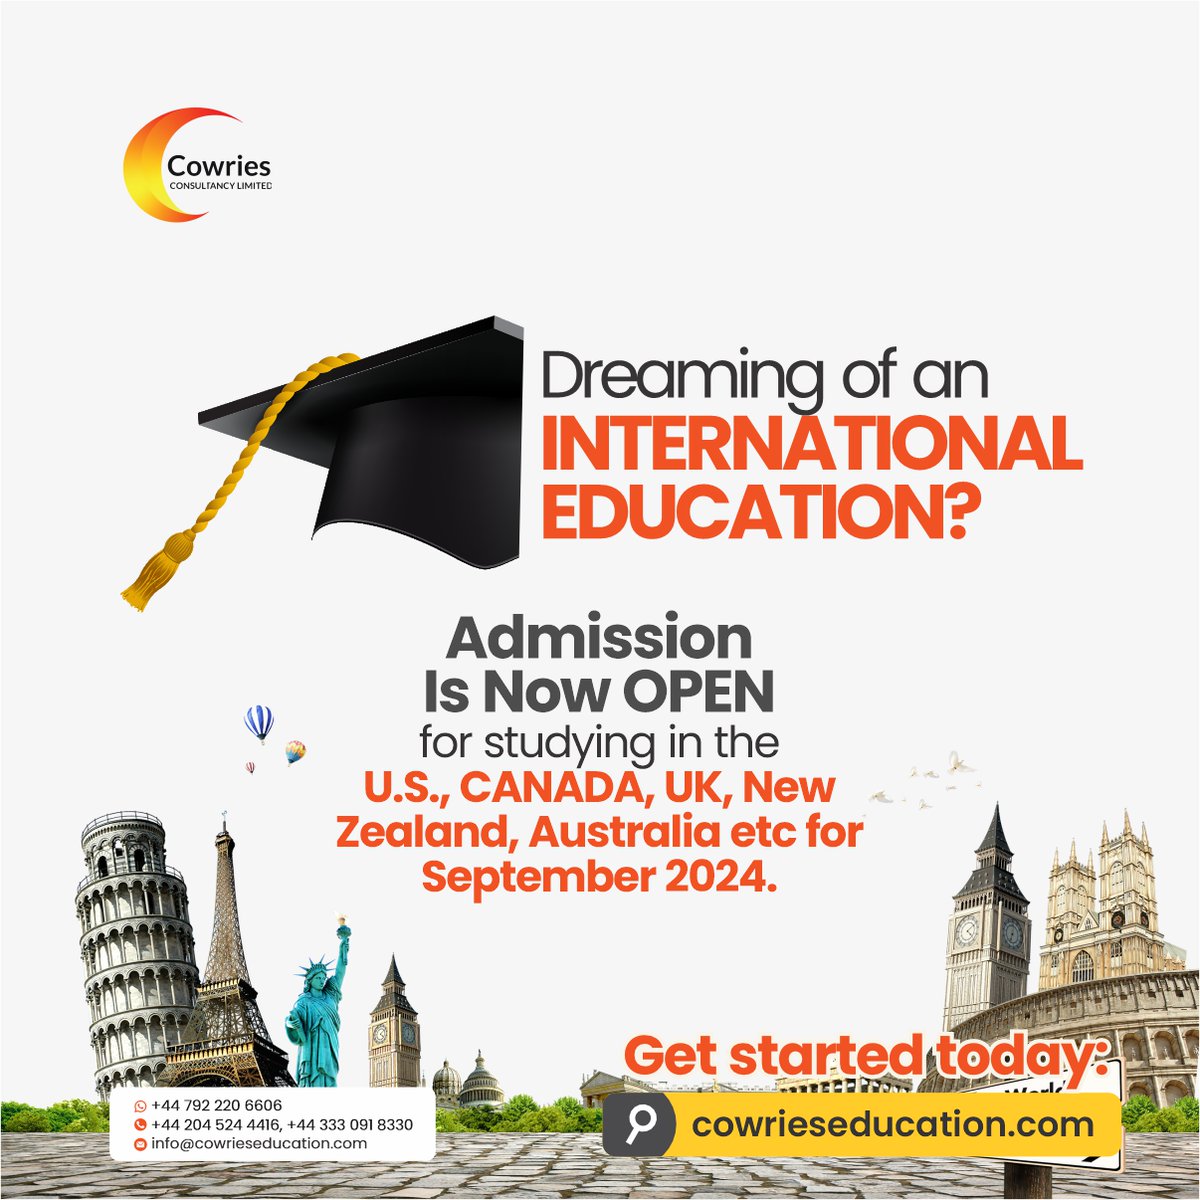 Whether you're aiming for an undergraduate degree or advancing with postgraduate studies, opportunities abound across these premier destinations Visit our website at cowrieseducation.com to get started. #InternationalEducation #StudyAbroad #USACanadaUK #OpenAdmissions2024